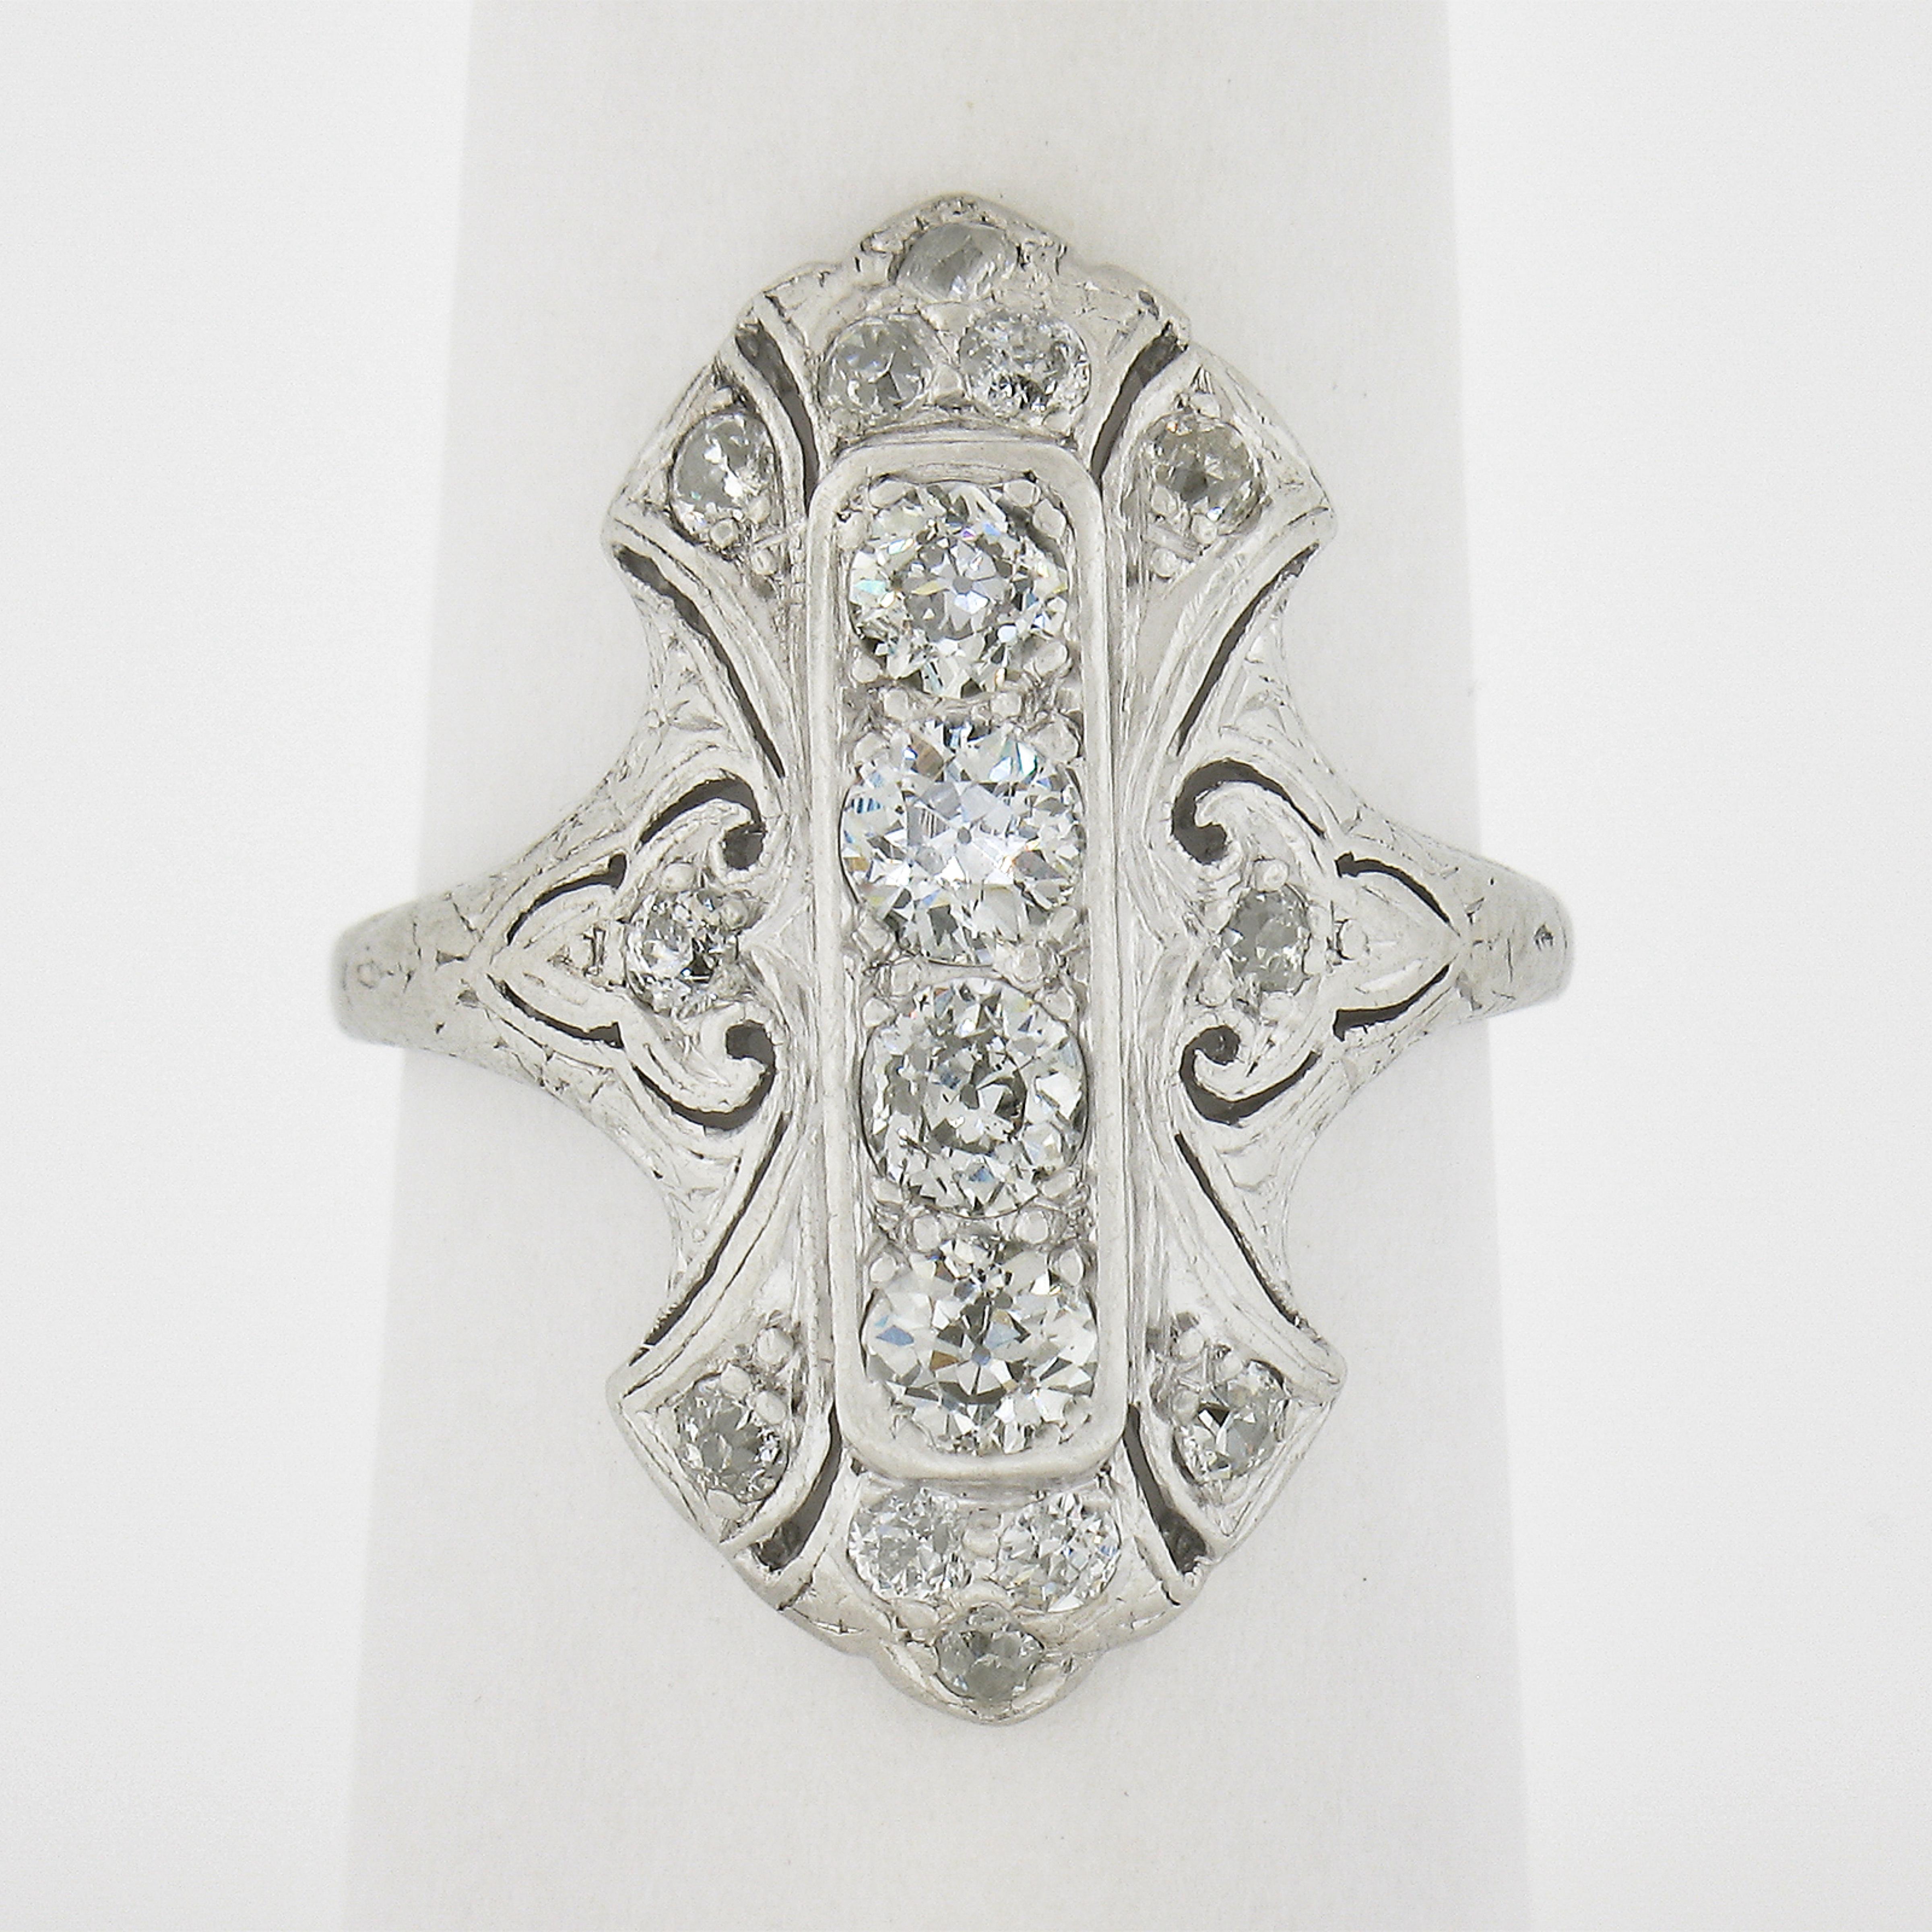 This incredible, all original, antique Edwardian period ring by Lambert Bros. is crafted in solid platinum. The ring showcases 16 old European & single cut diamonds elegantly pave set across the long and unusual design. The fiery diamonds in this